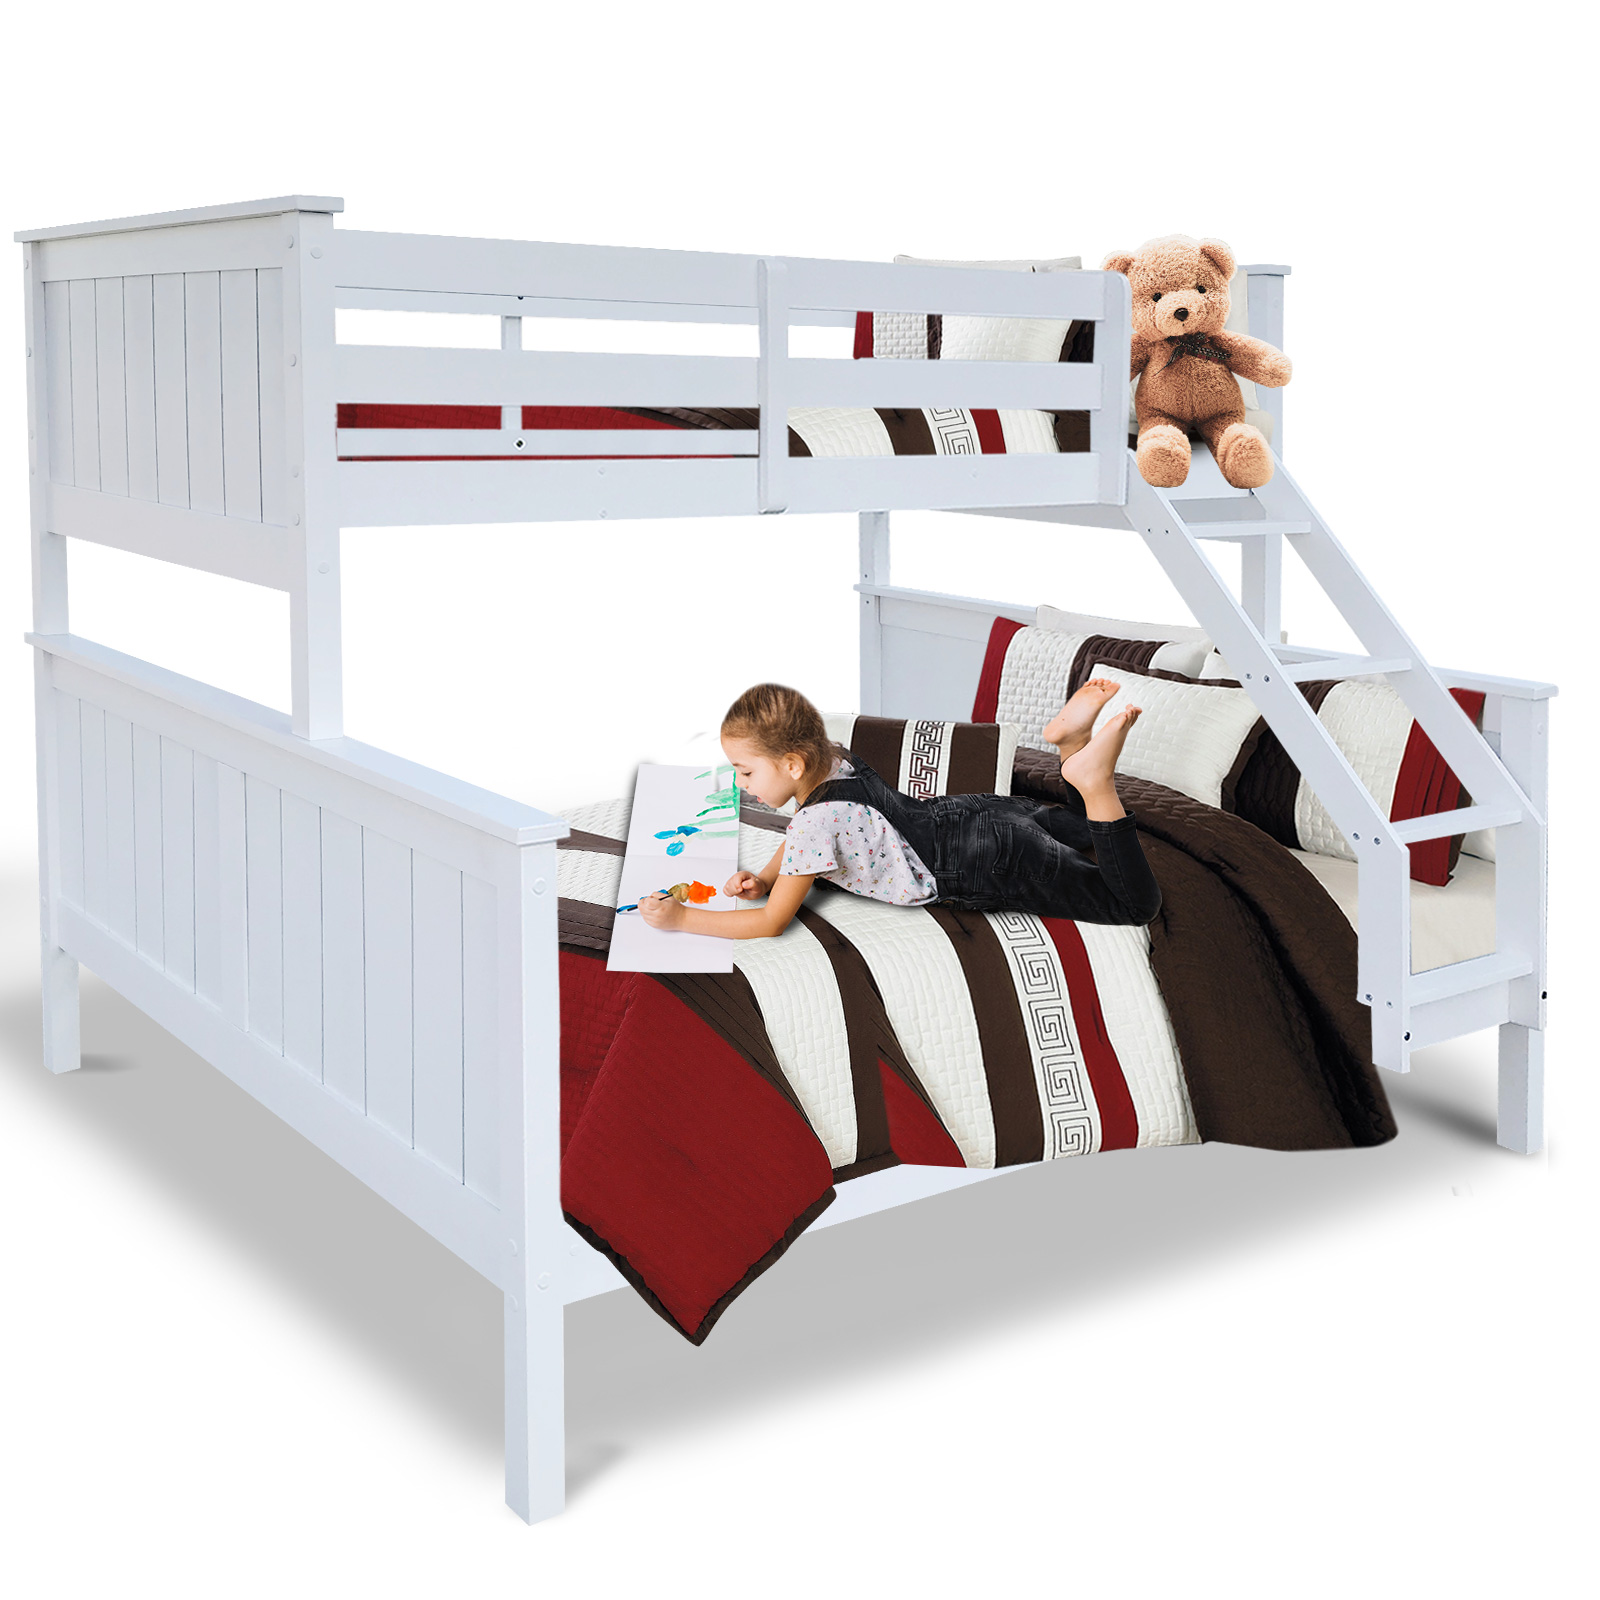 Double Bunk Bed With Storage, Single Over Single Bunk Bed